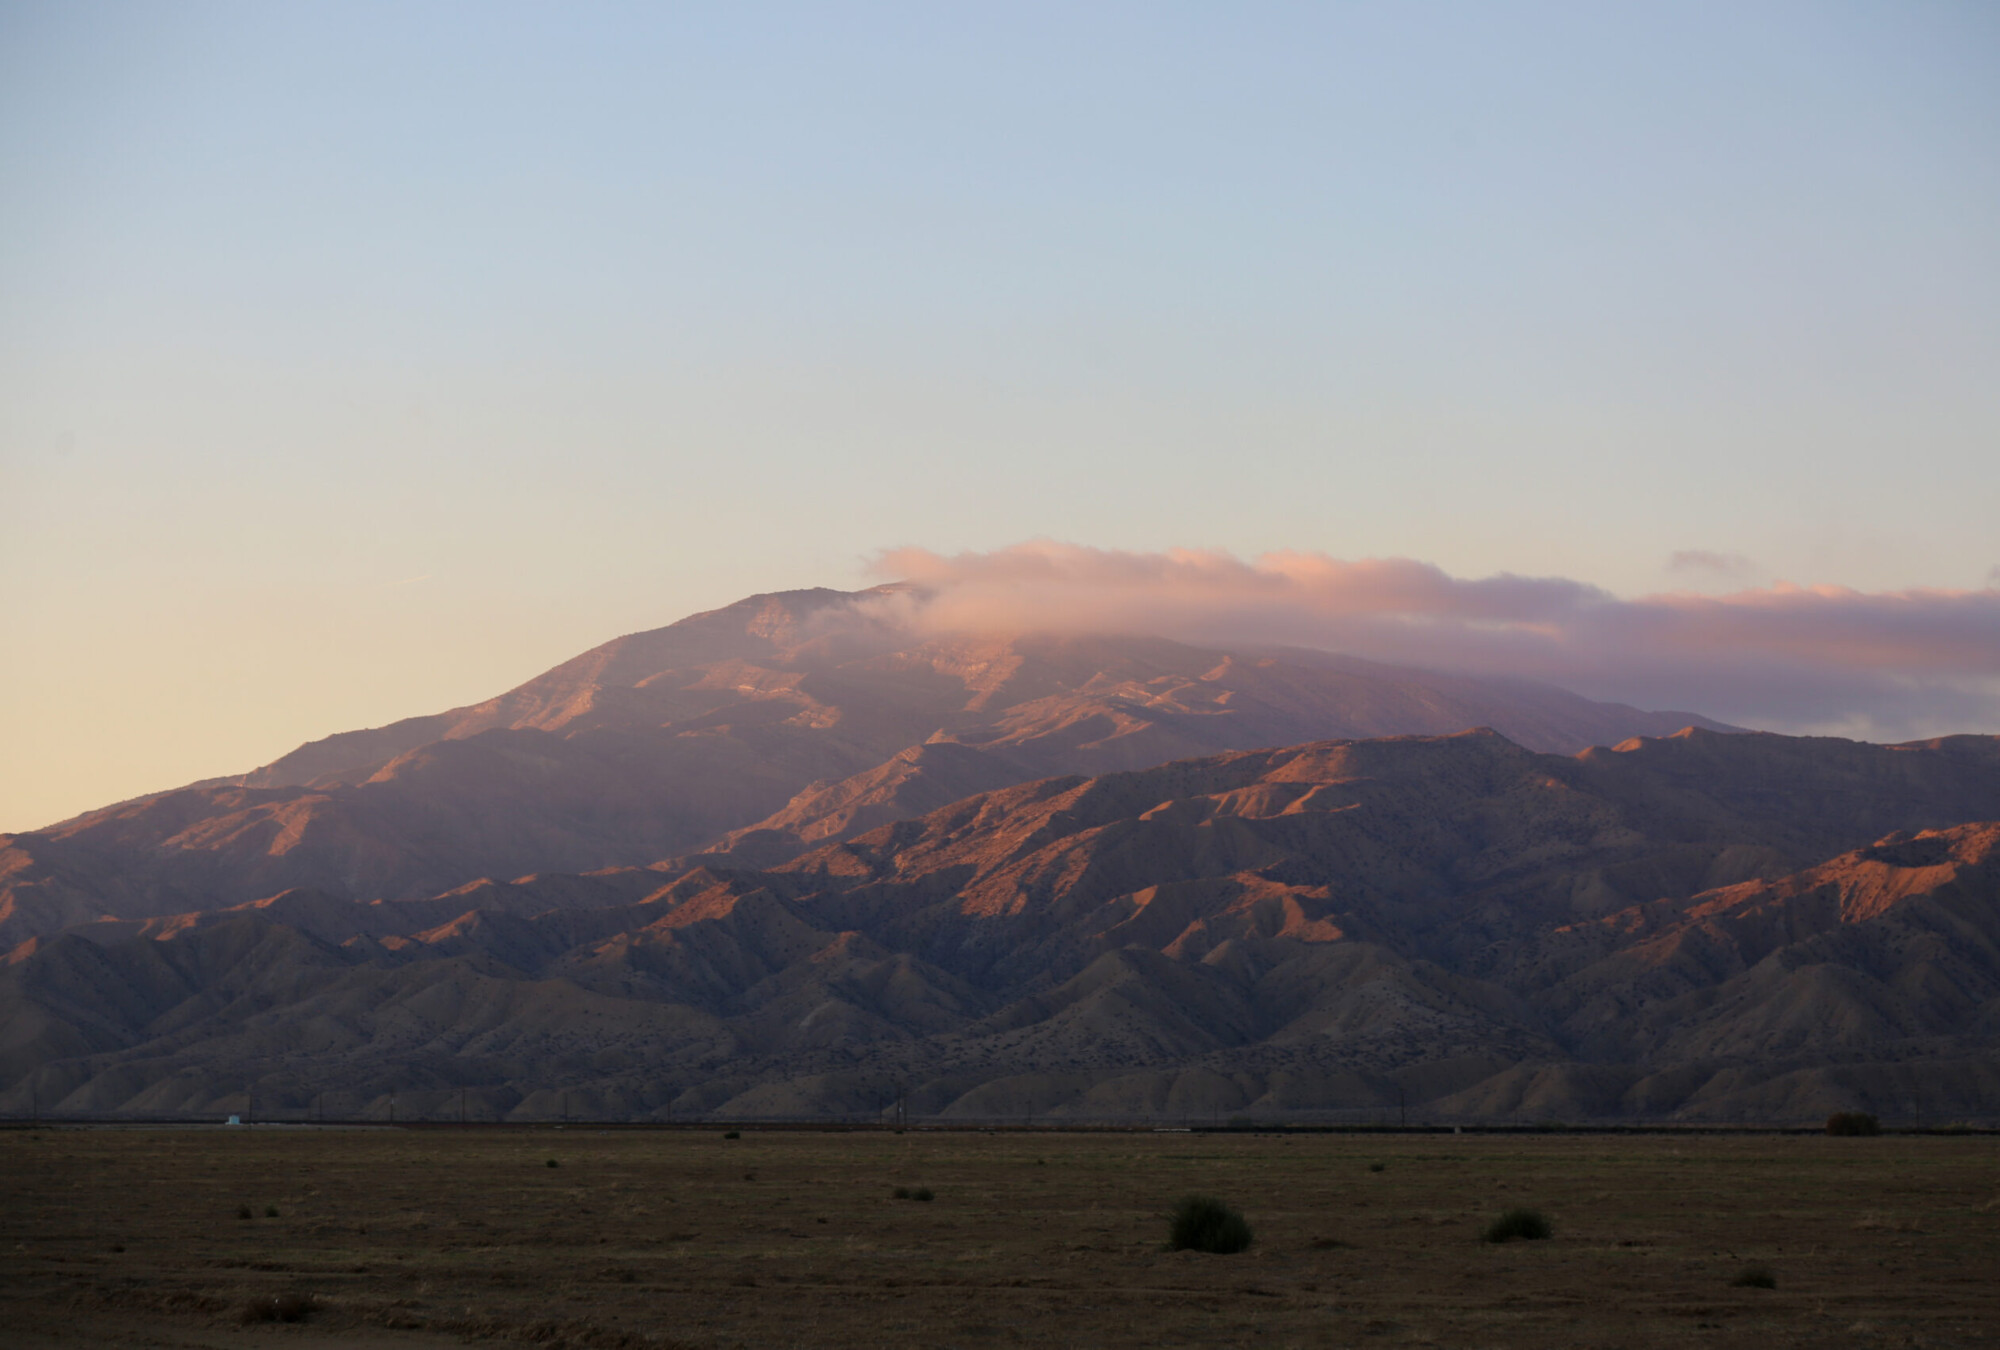 Mountain landscape at sunset in New Cuyama, California.